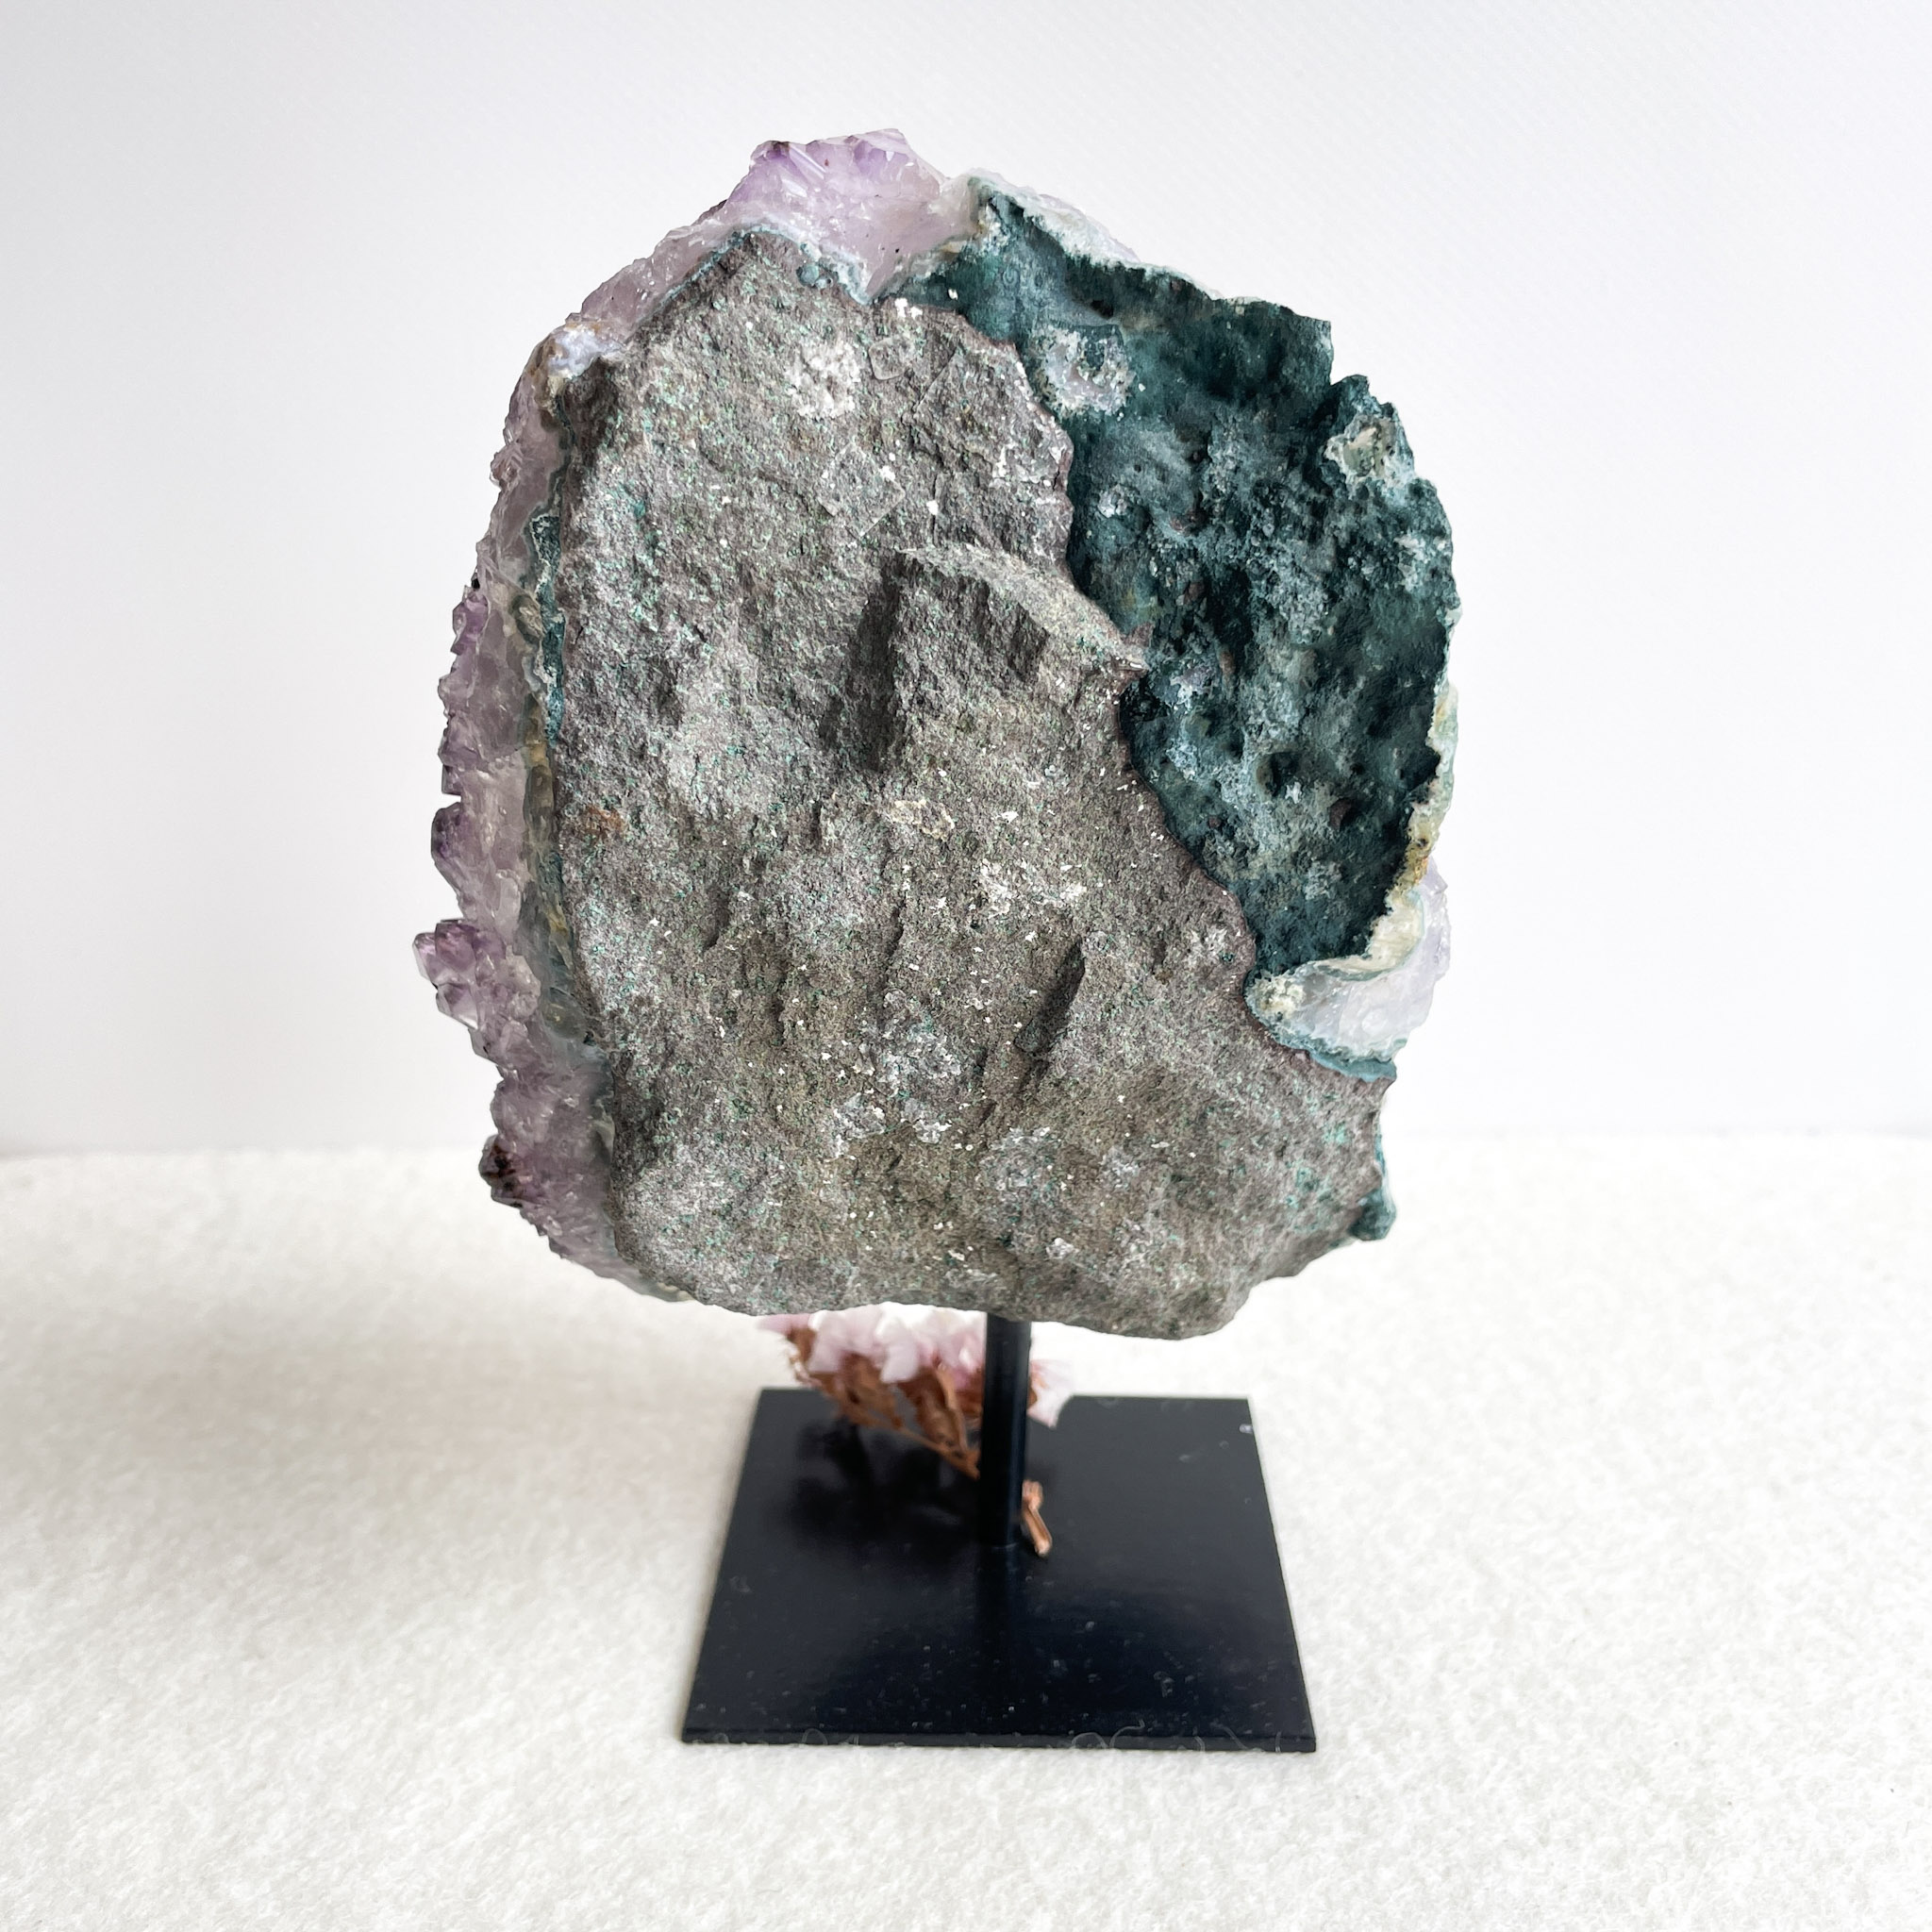 A large geode displayed on a black stand, featuring rough outer rock surface with an interior lining of crystalline amethyst and pockets of blue-green mineral deposits.